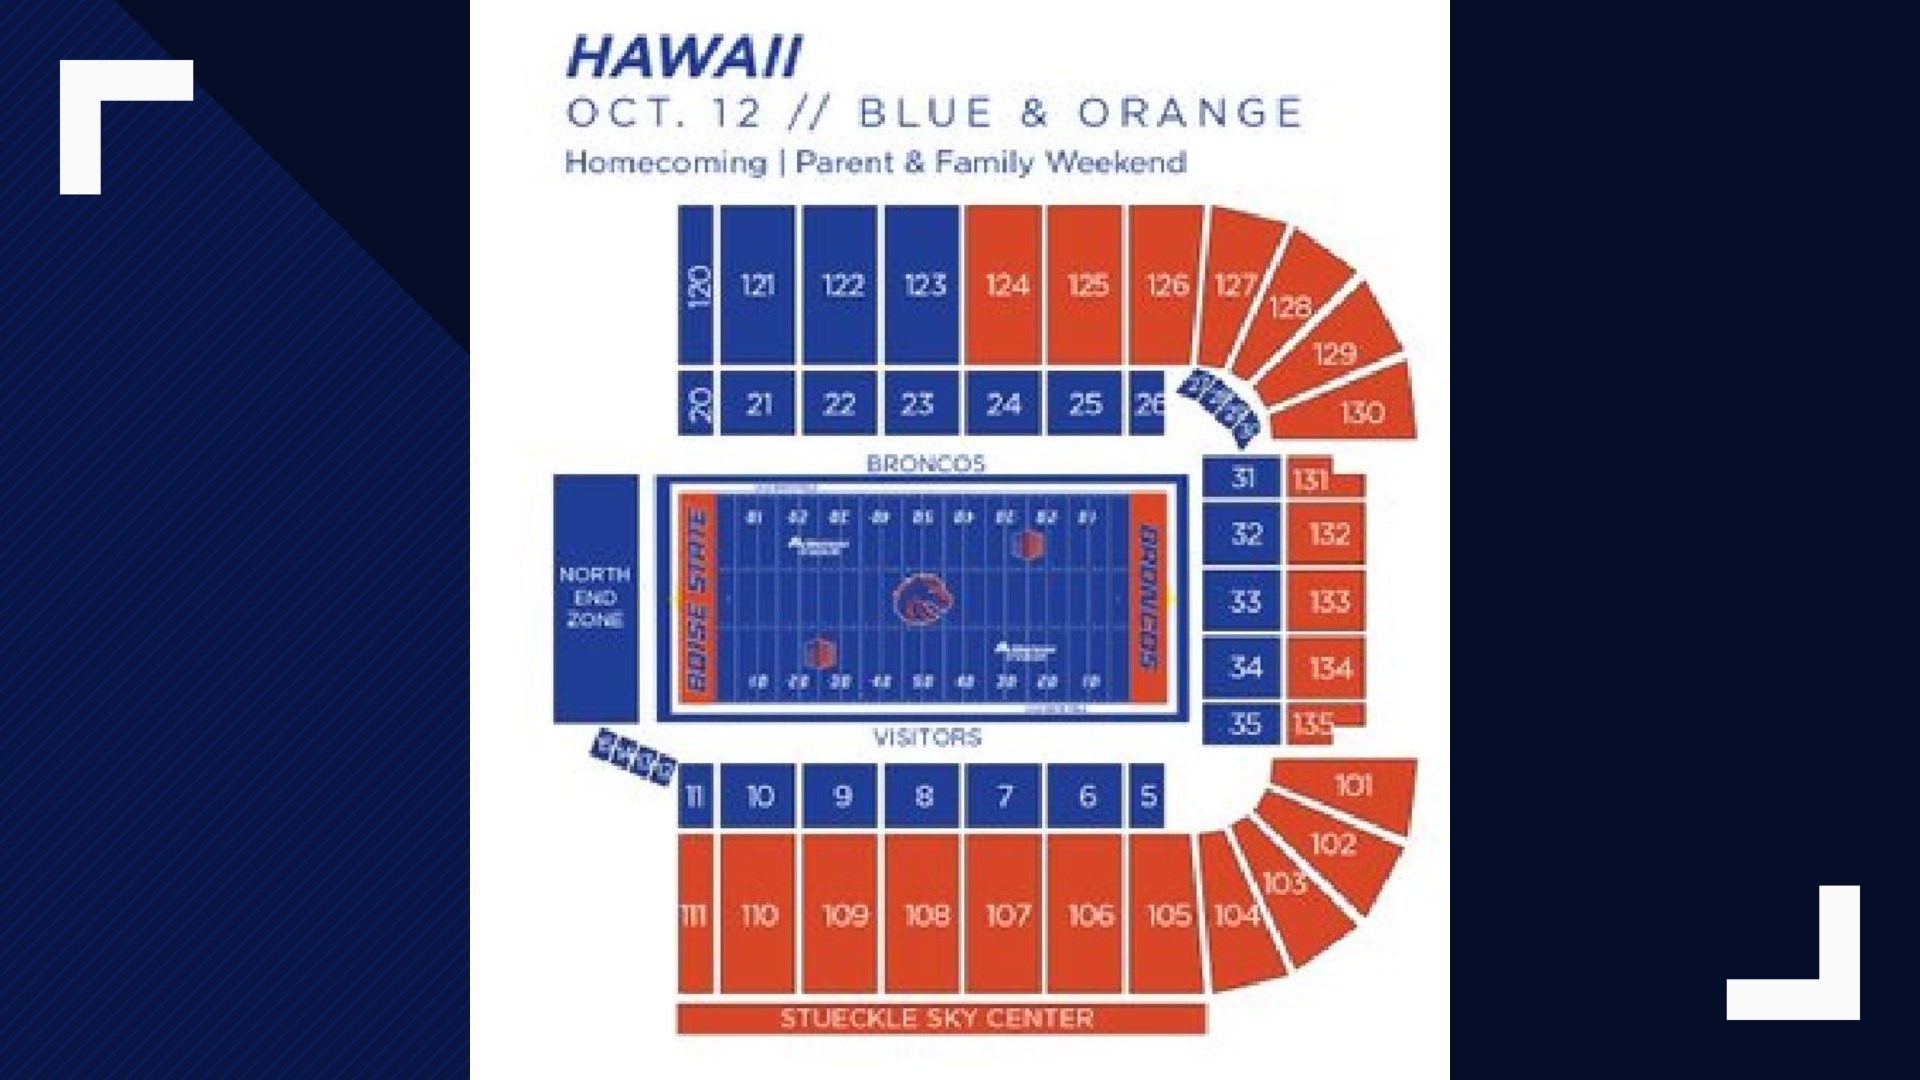 Boise State Football releases fan color schemes for 2019 season home